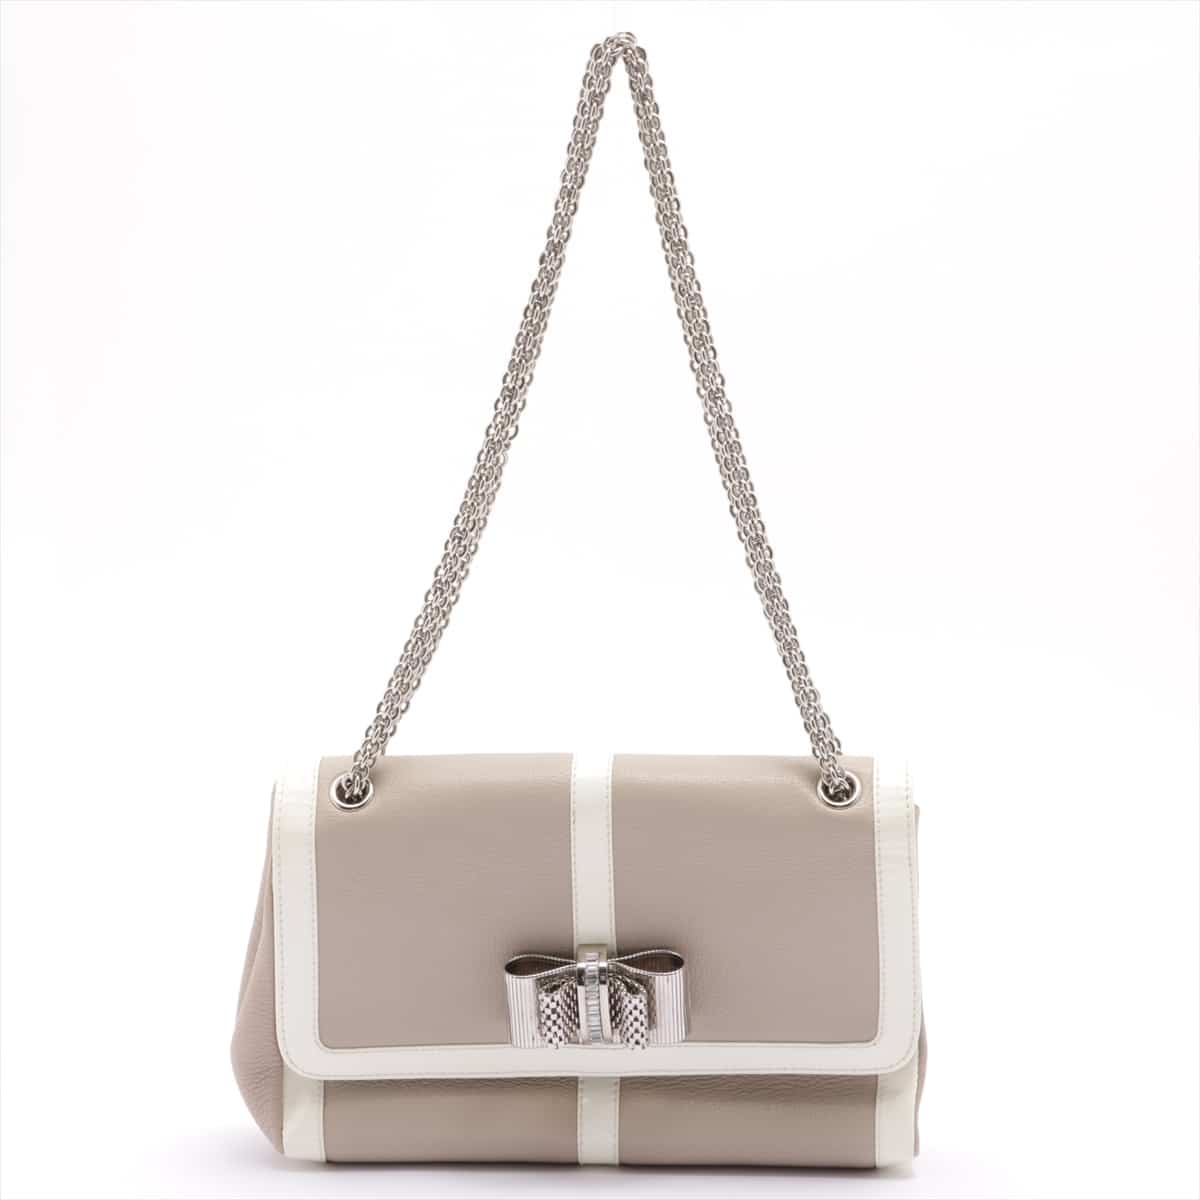 Christian Louboutin Sweet charity Leather & patent Chain shoulder bag Beige